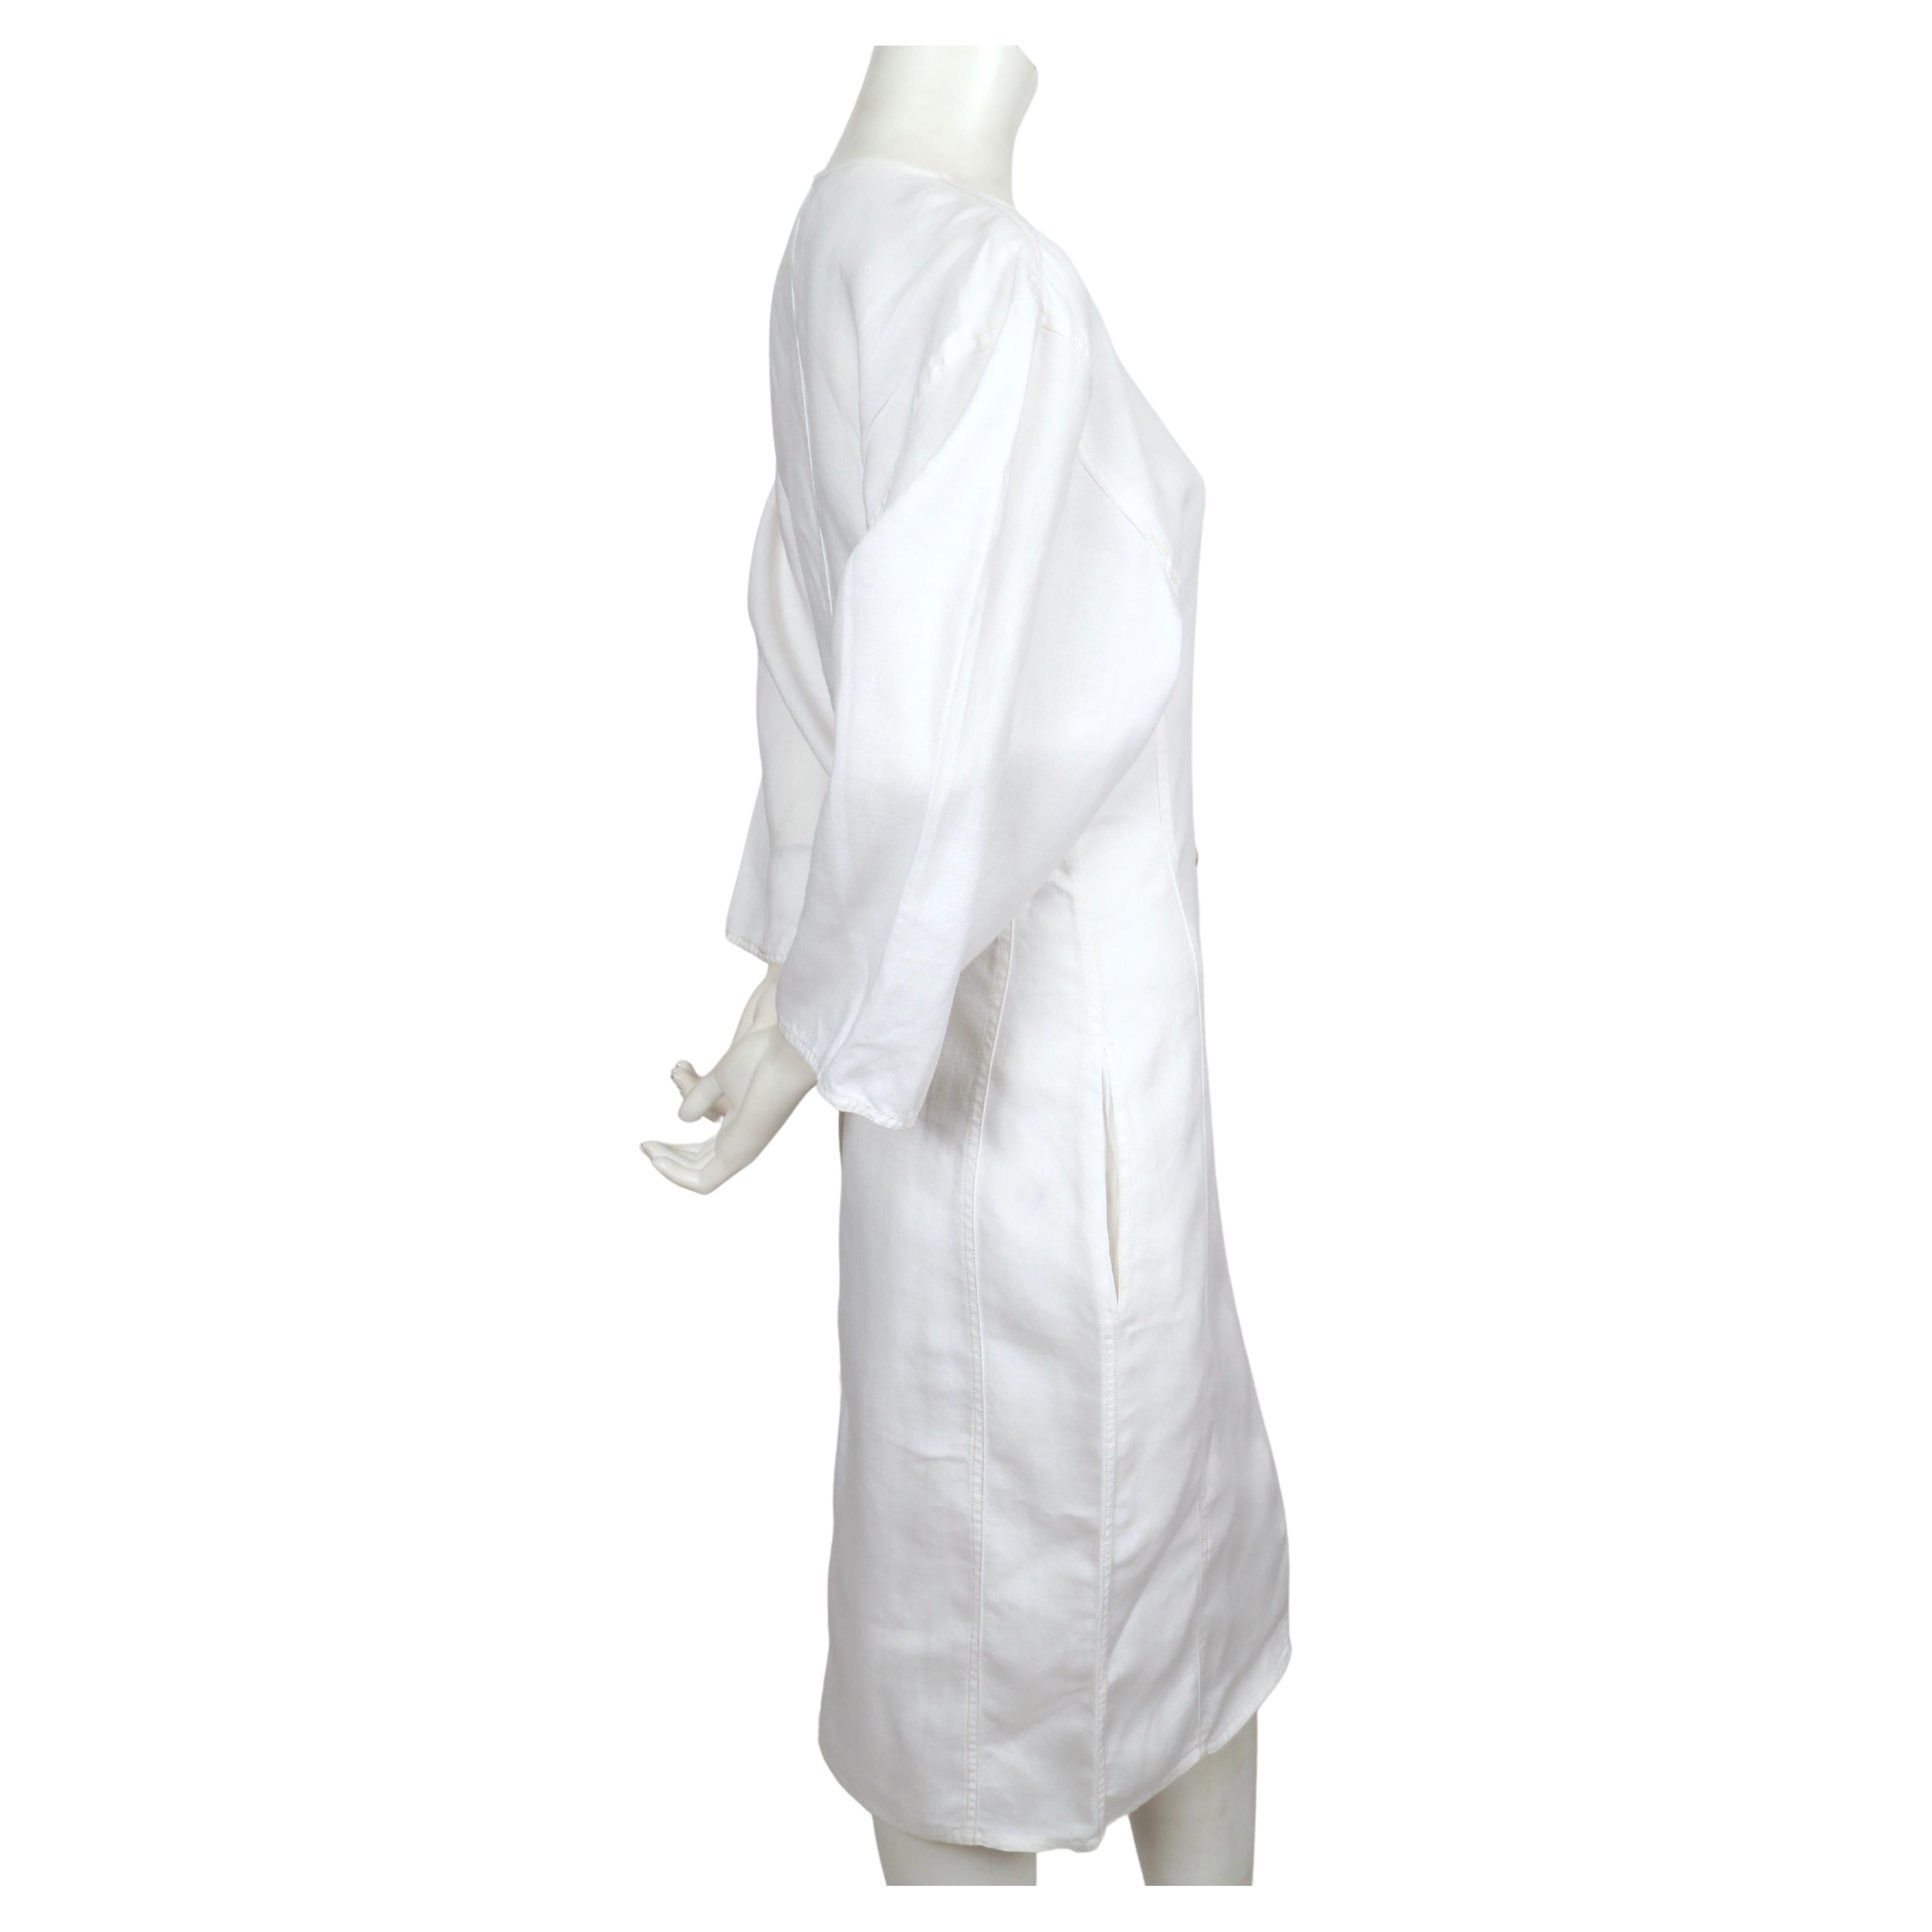 1980's ANNE MARIE BERETTA white linen dress In Good Condition For Sale In San Fransisco, CA